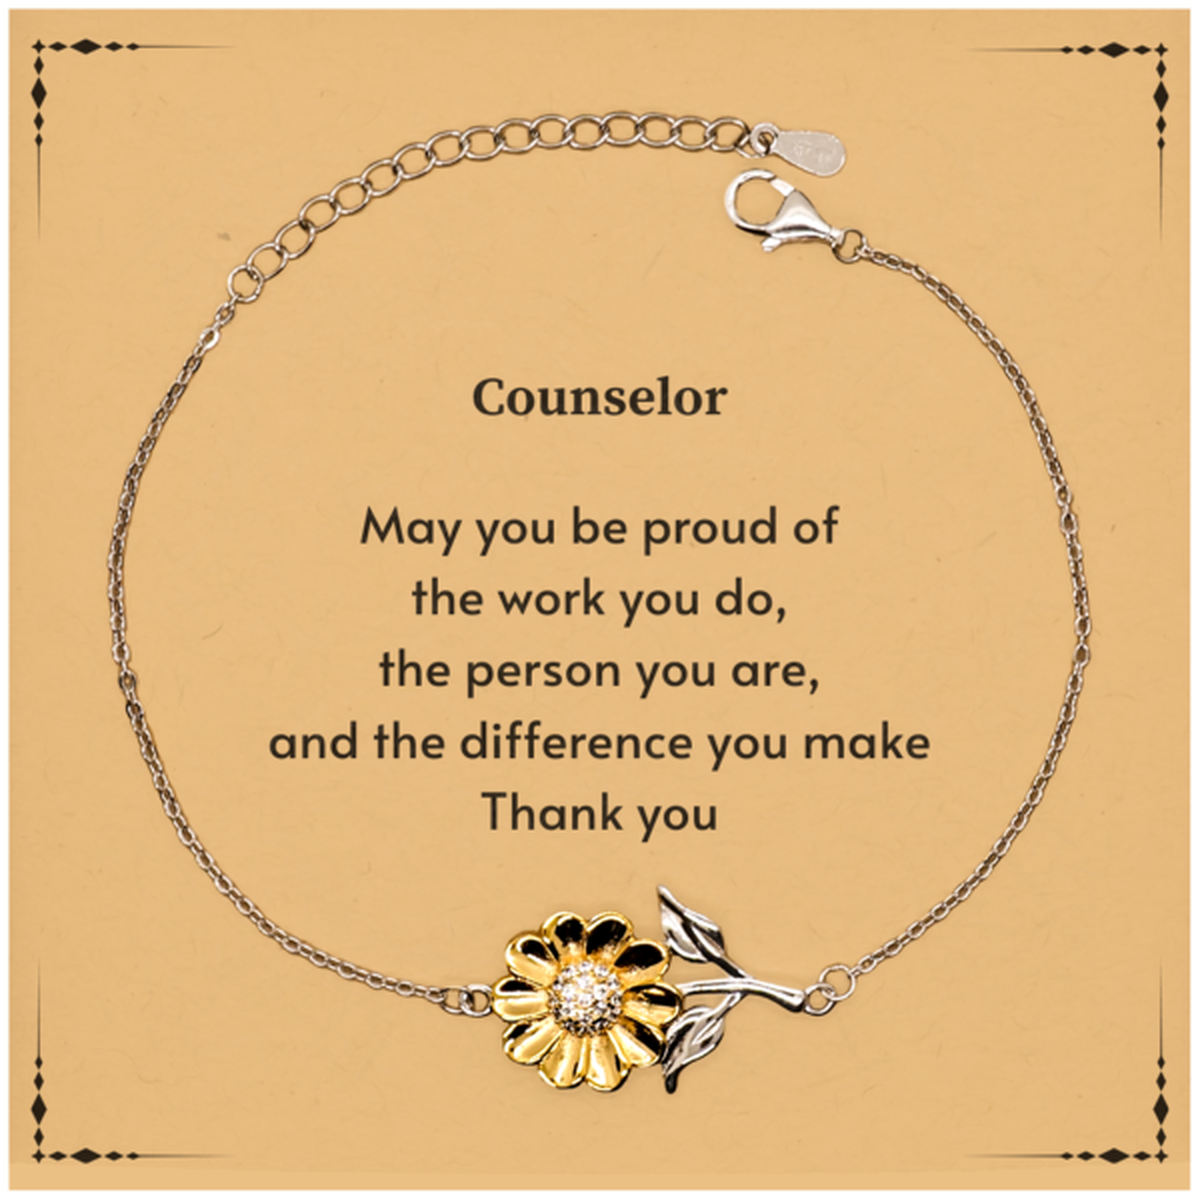 Heartwarming Sunflower Bracelet Retirement Coworkers Gifts for Counselor, Counselor May You be proud of the work you do, the person you are Gifts for Boss Men Women Friends